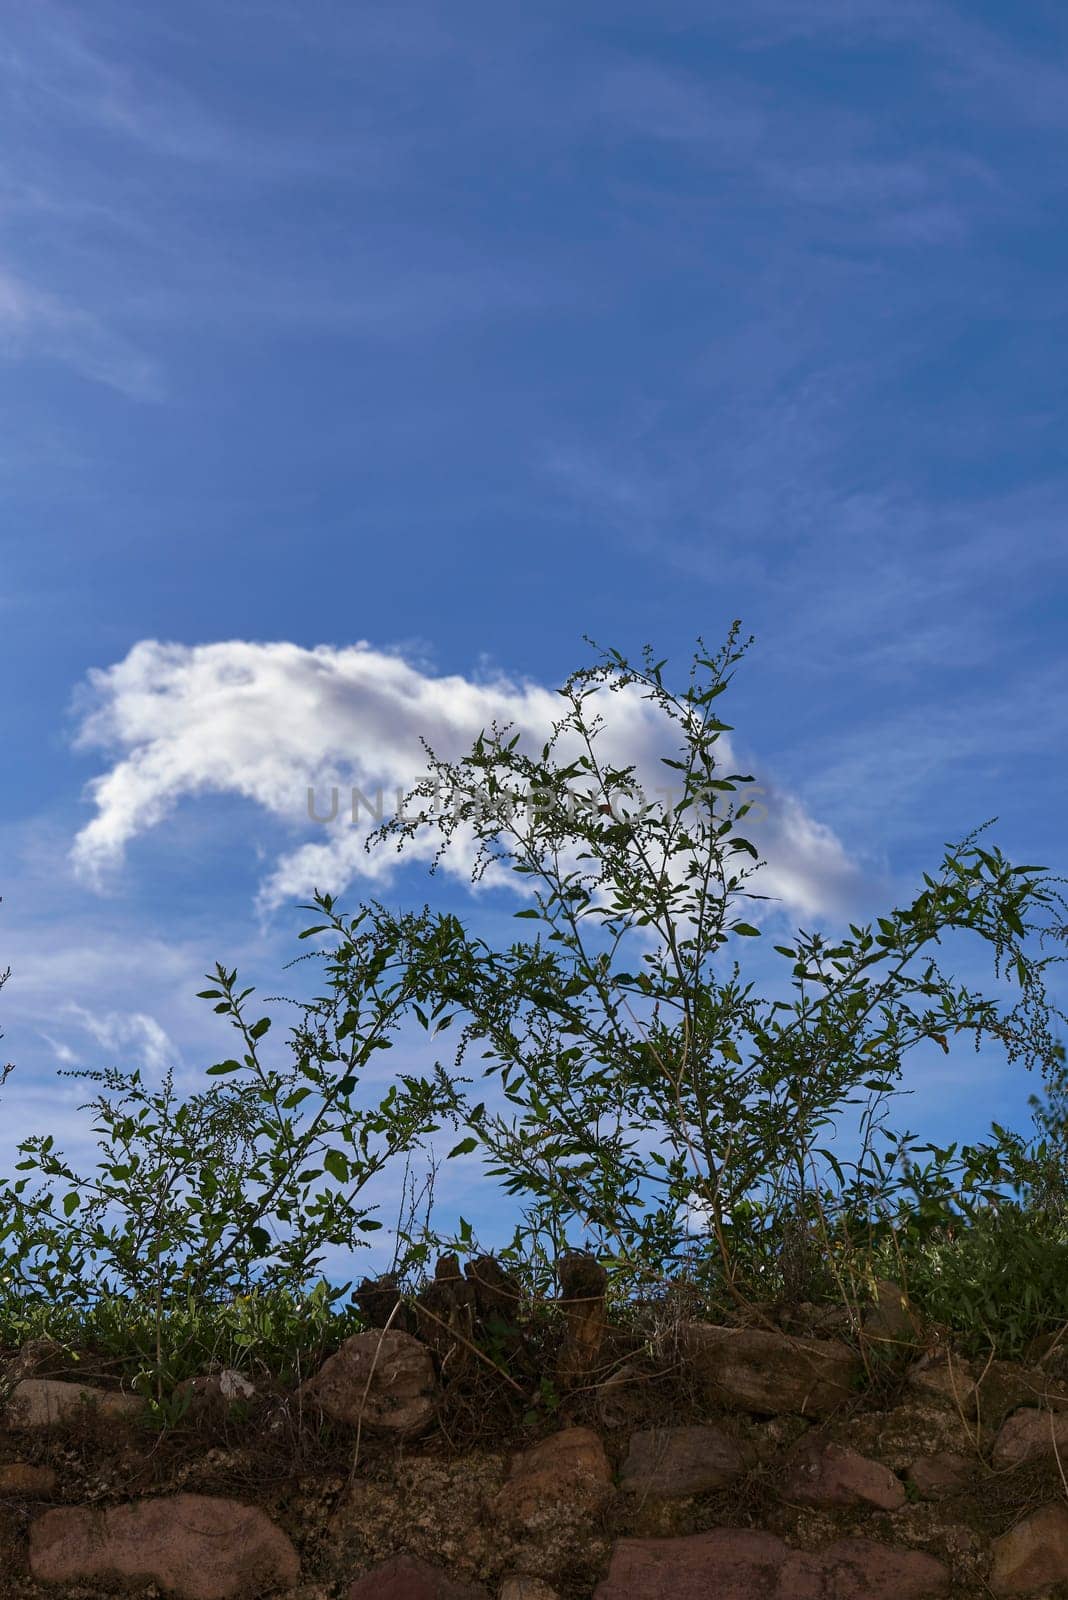 A cloud over plants in the blue sky. Metaphor, stone wall, lonely, no one, free space, green, frontal